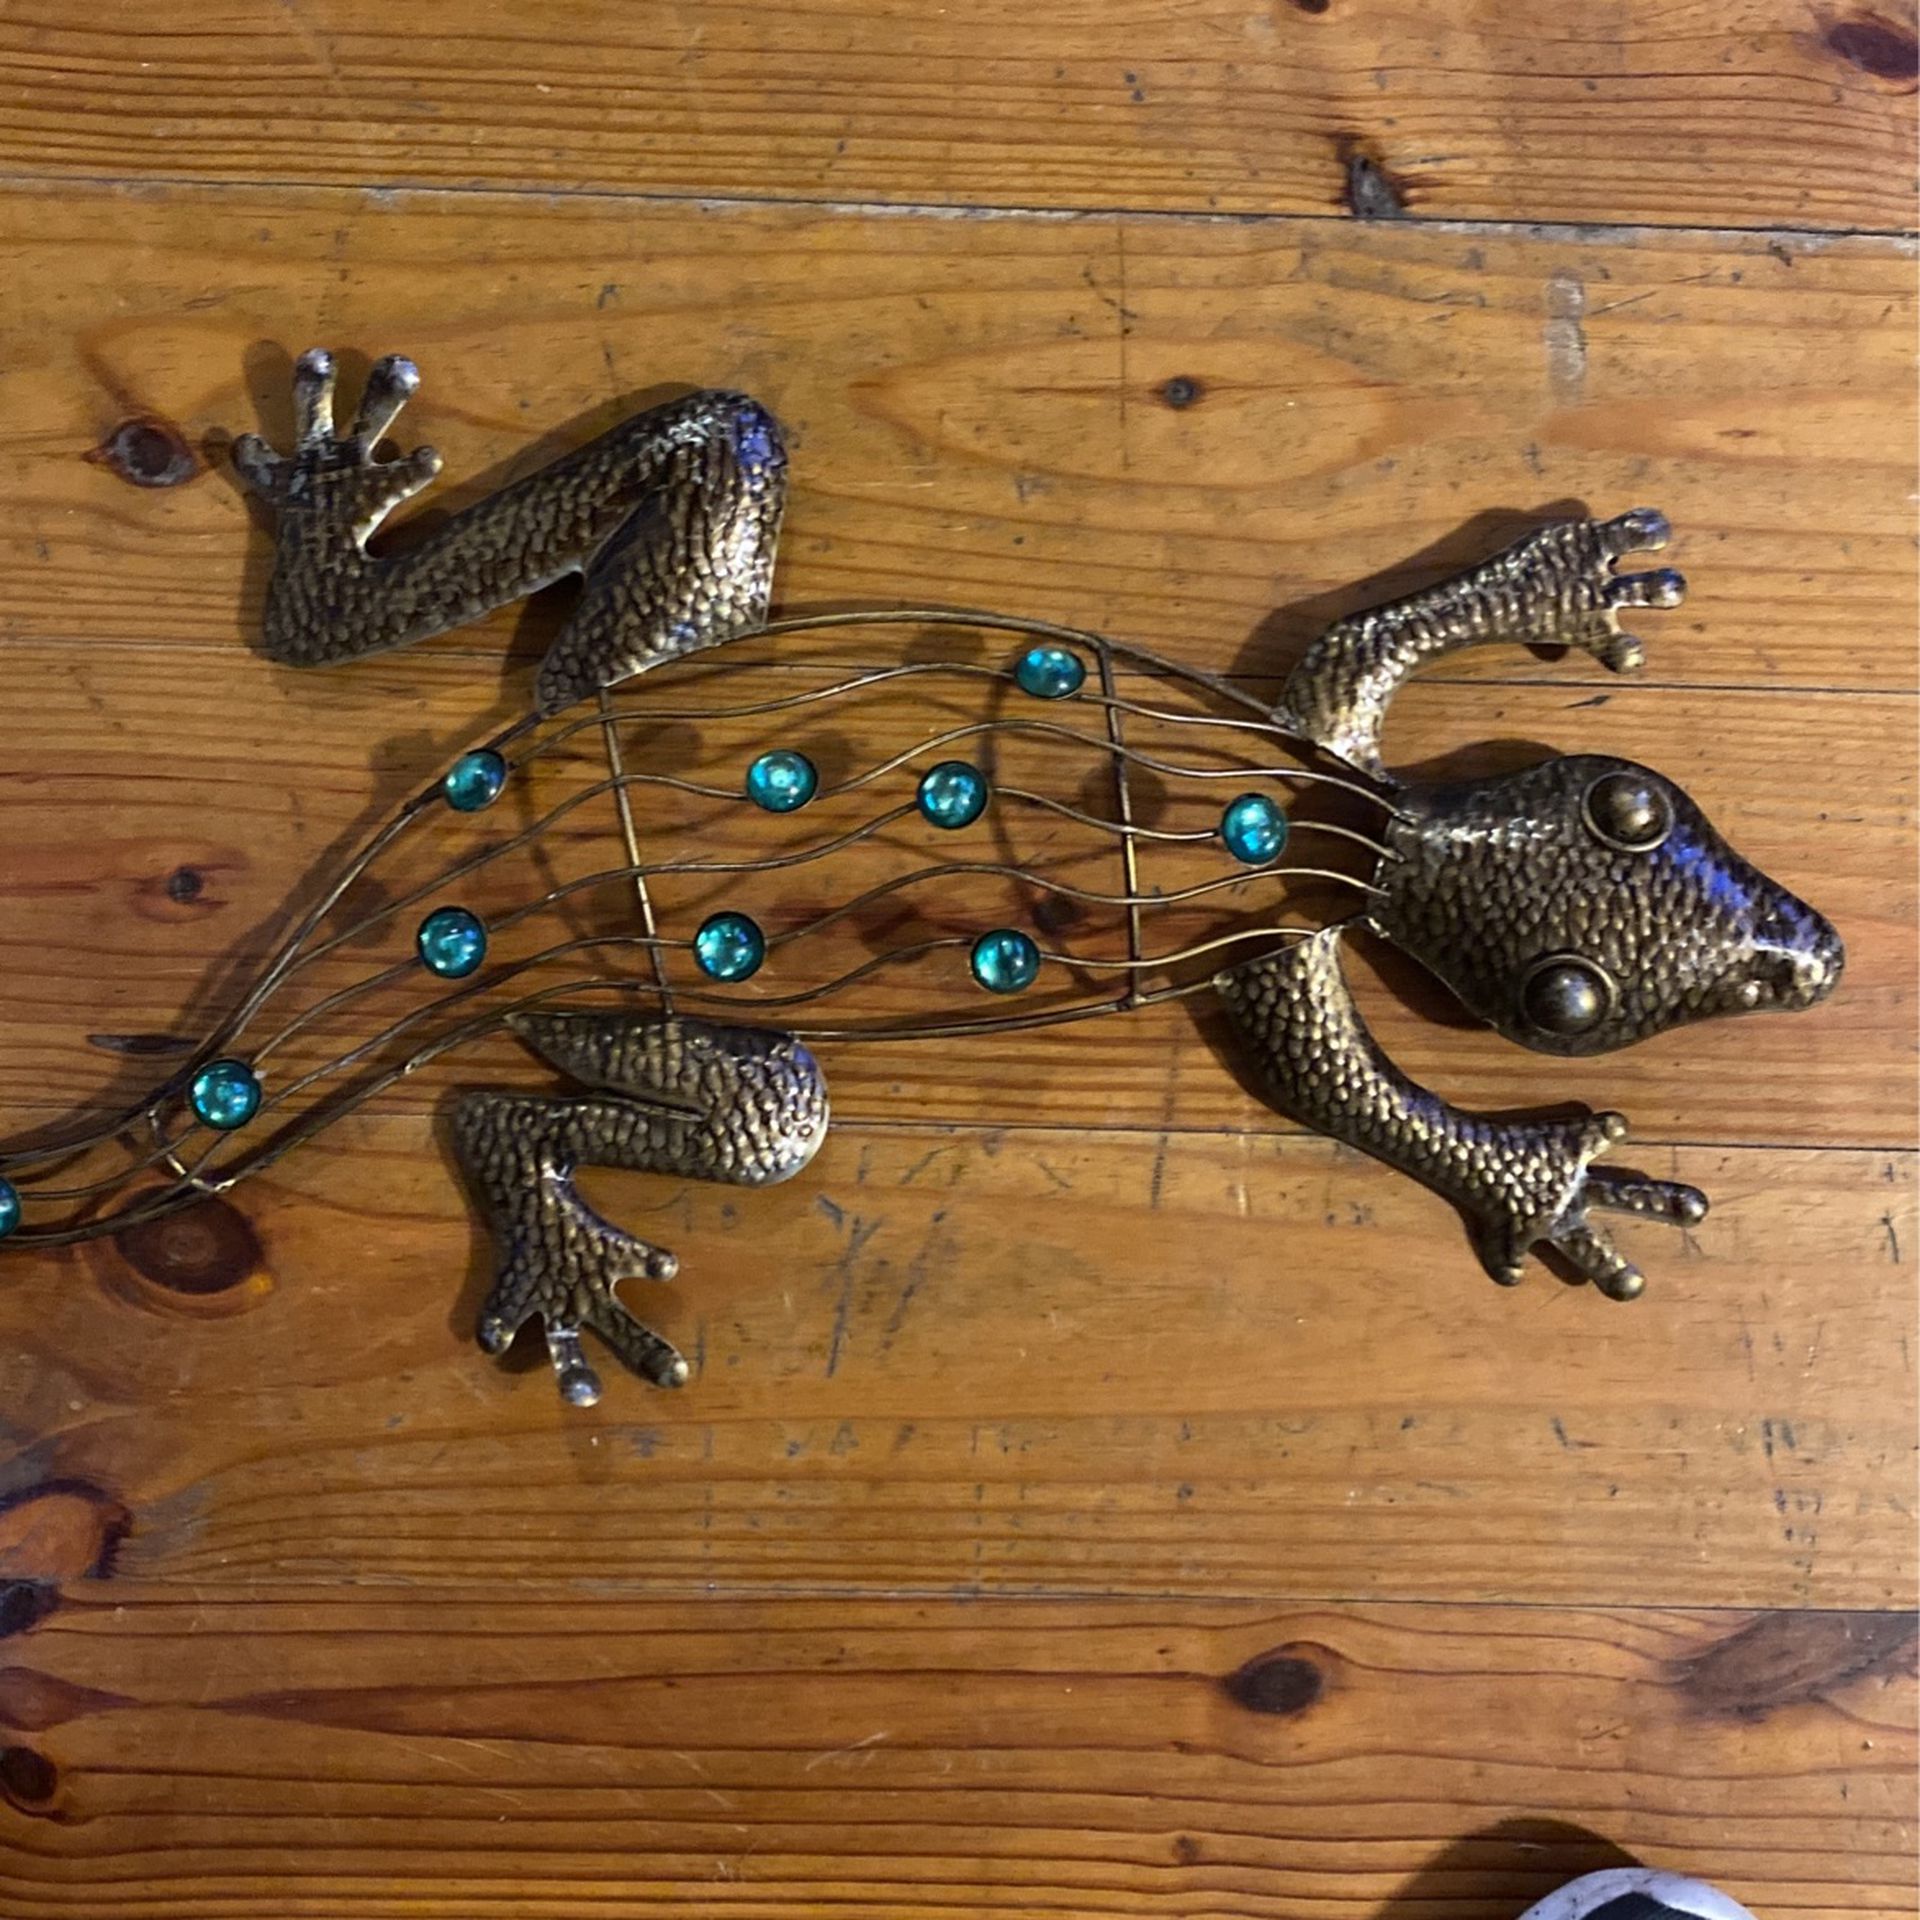 Metal Picture Of Lizard With Jewels